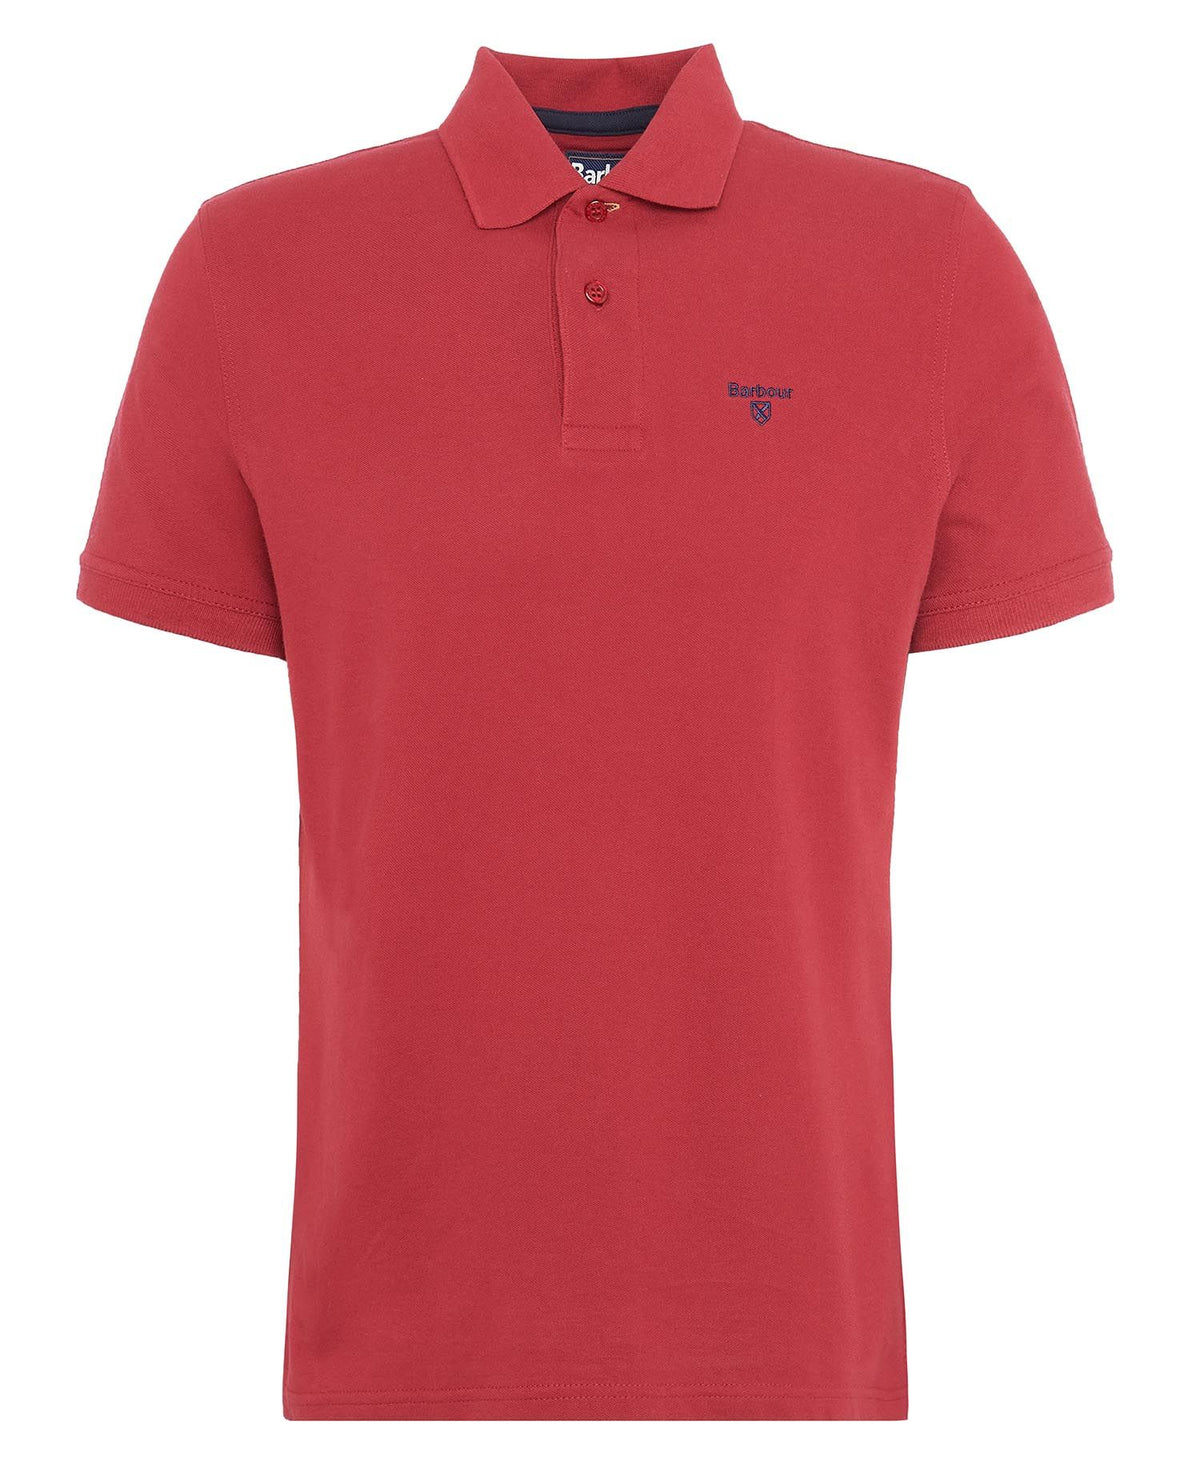 Barbour Men's red light sports polo shirt